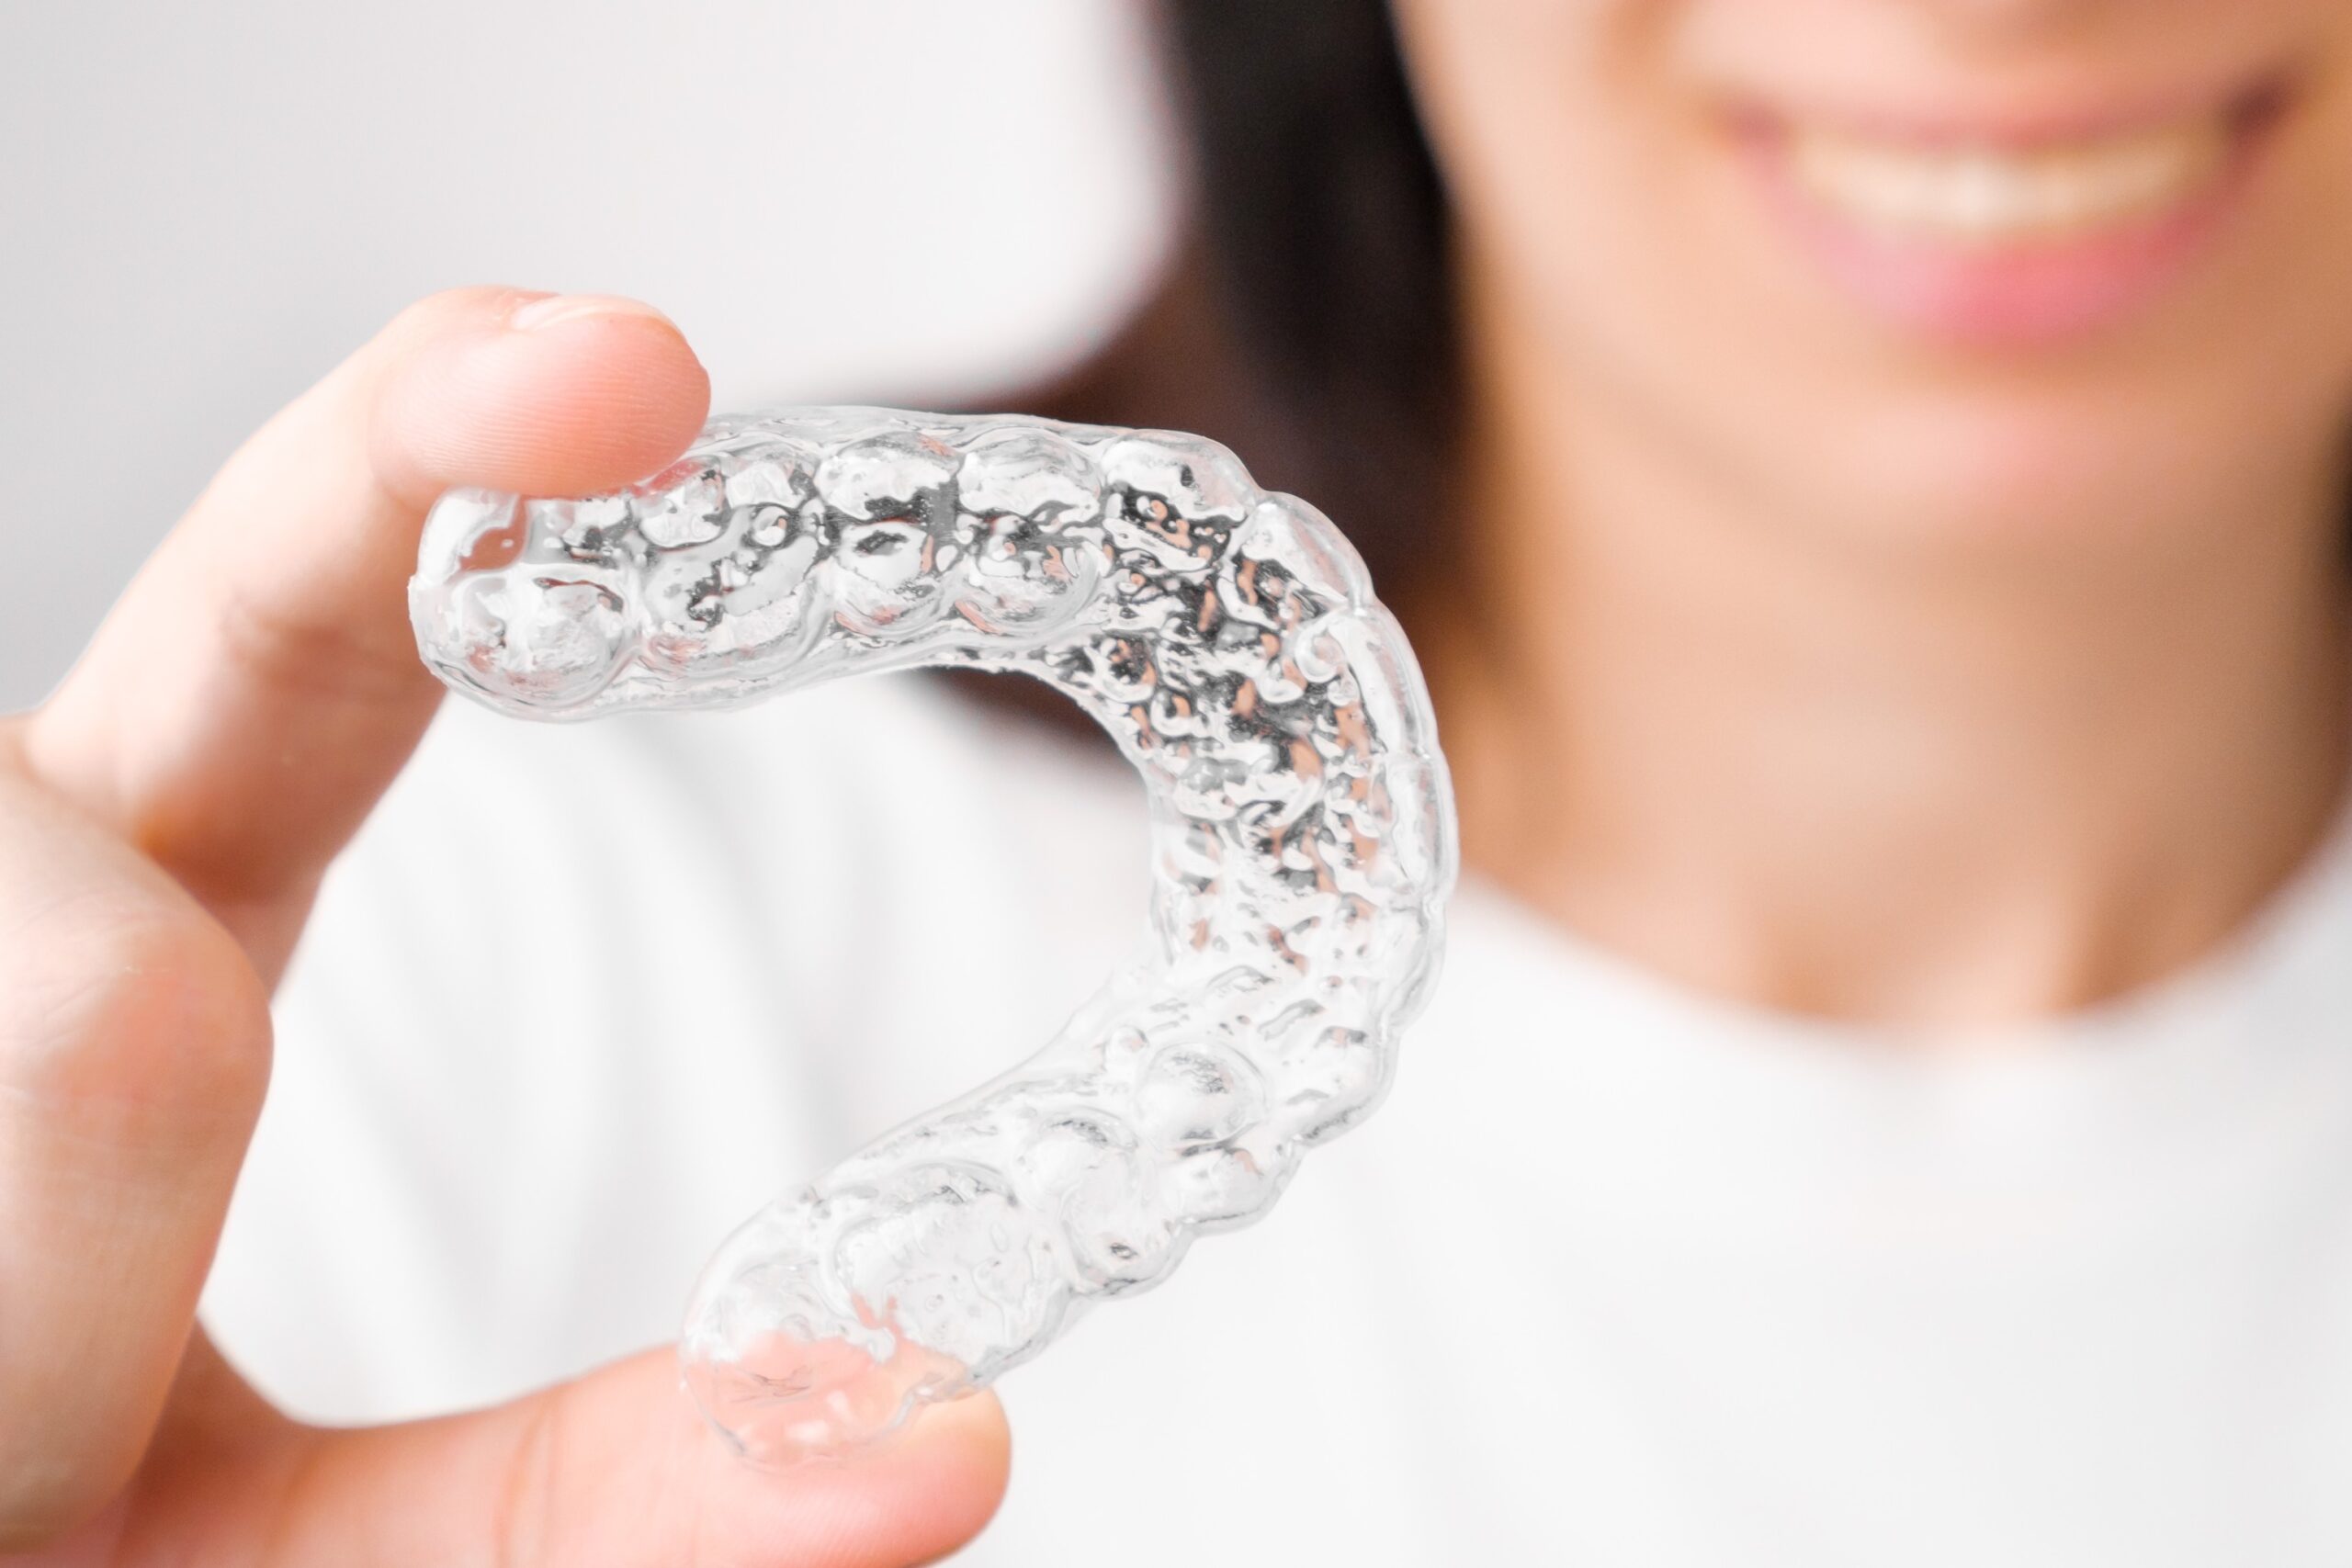 How Old is too Old for Braces or Clear Aligners?